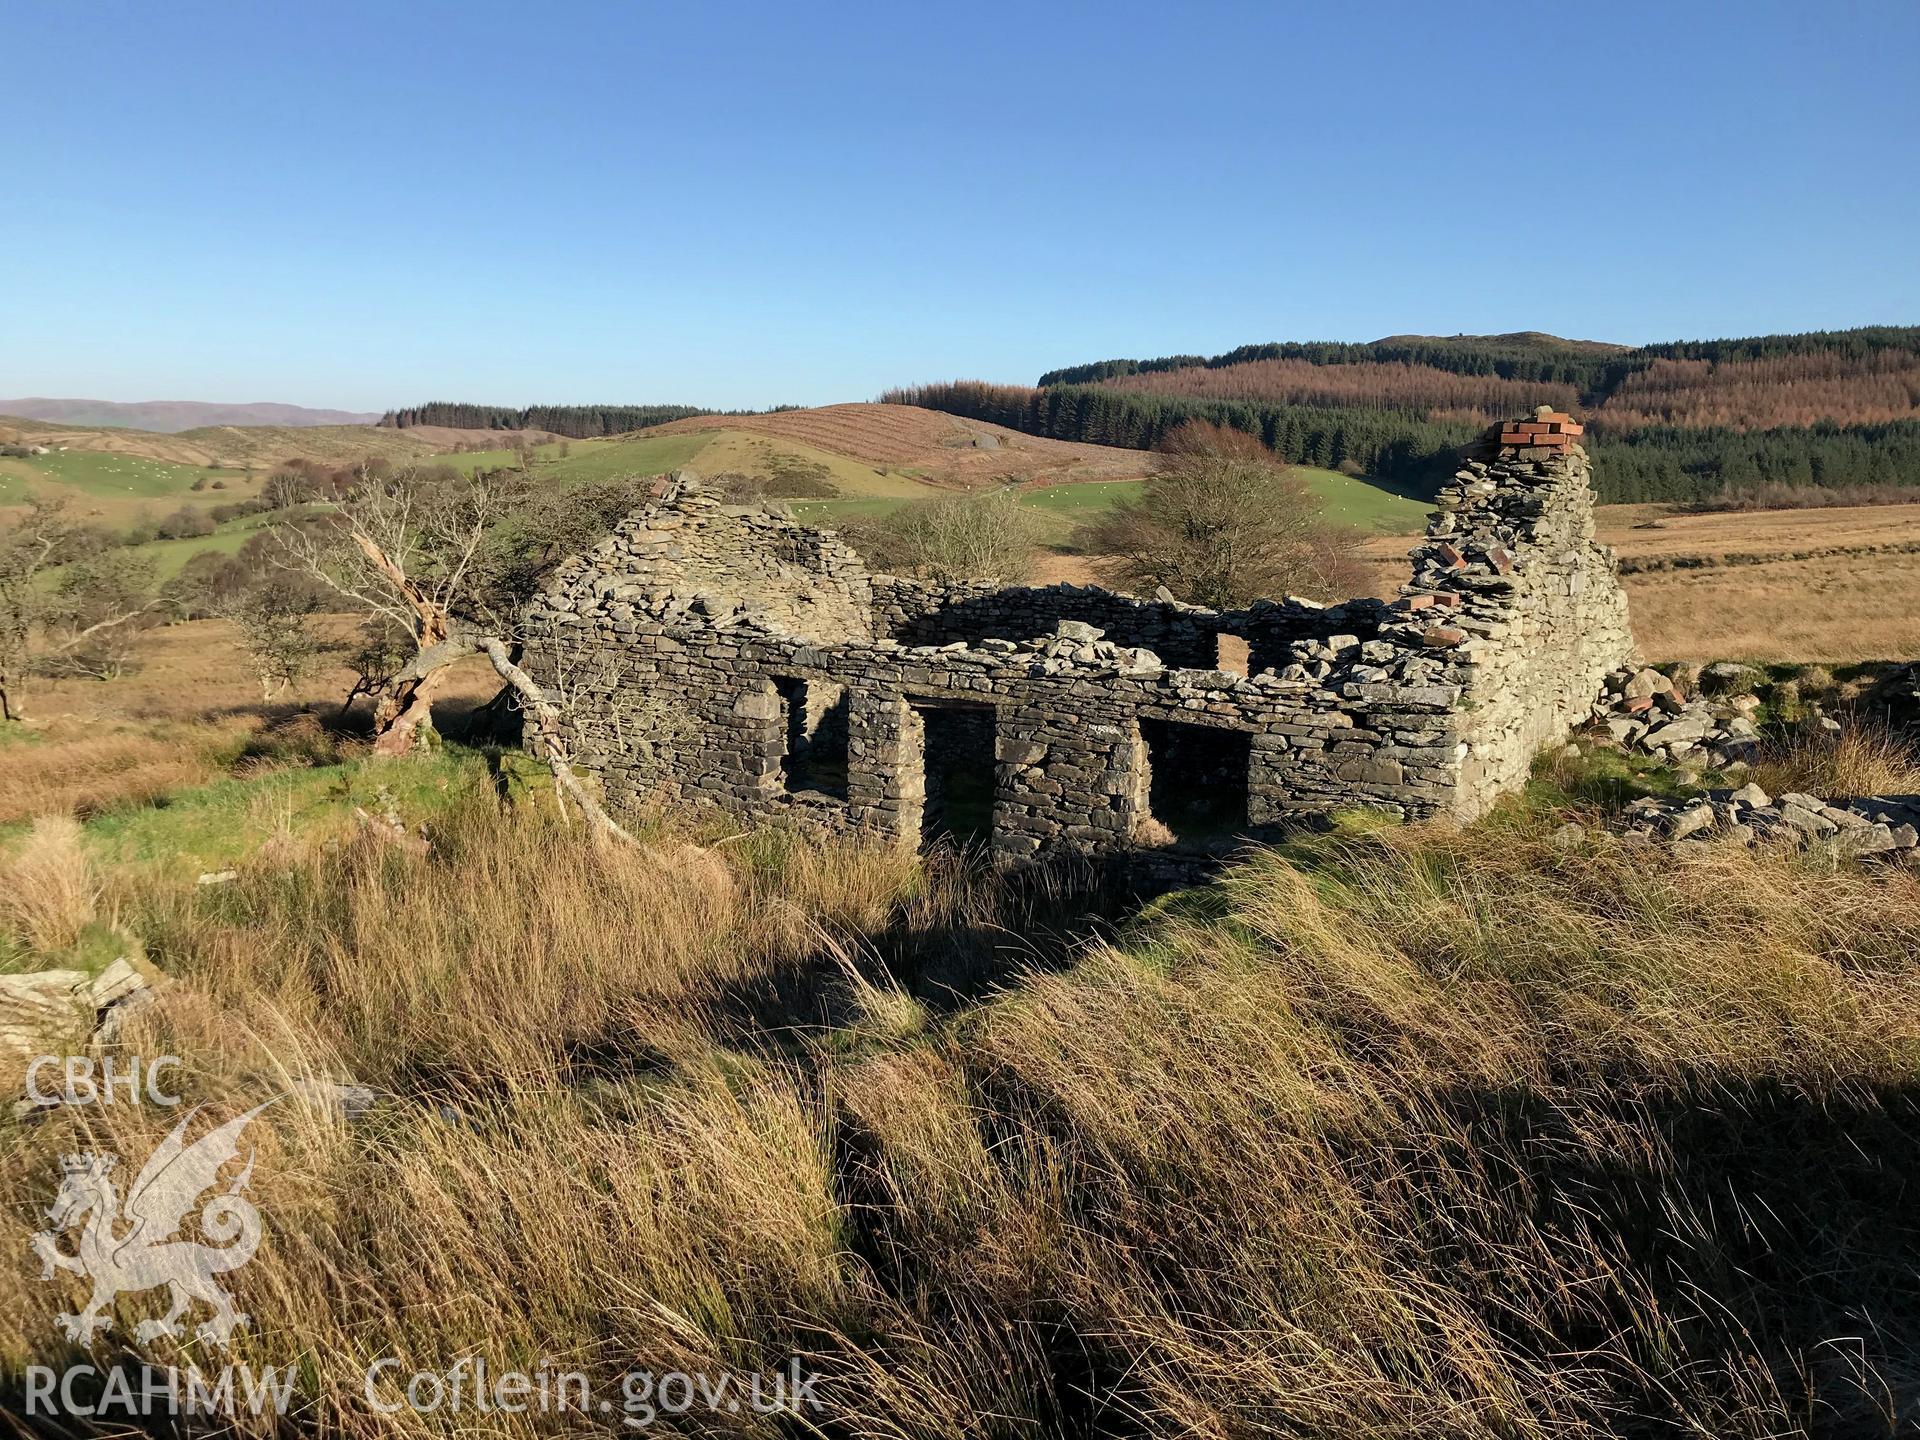 Exterior side elevation showing remains of doorway, window spaces and chimney piece of Tynewydd stone cottage, which is south west of Bryneithinog farm, Ystrad Fflur. Colour photograph taken by Paul R. Davis on 18th November 2018.